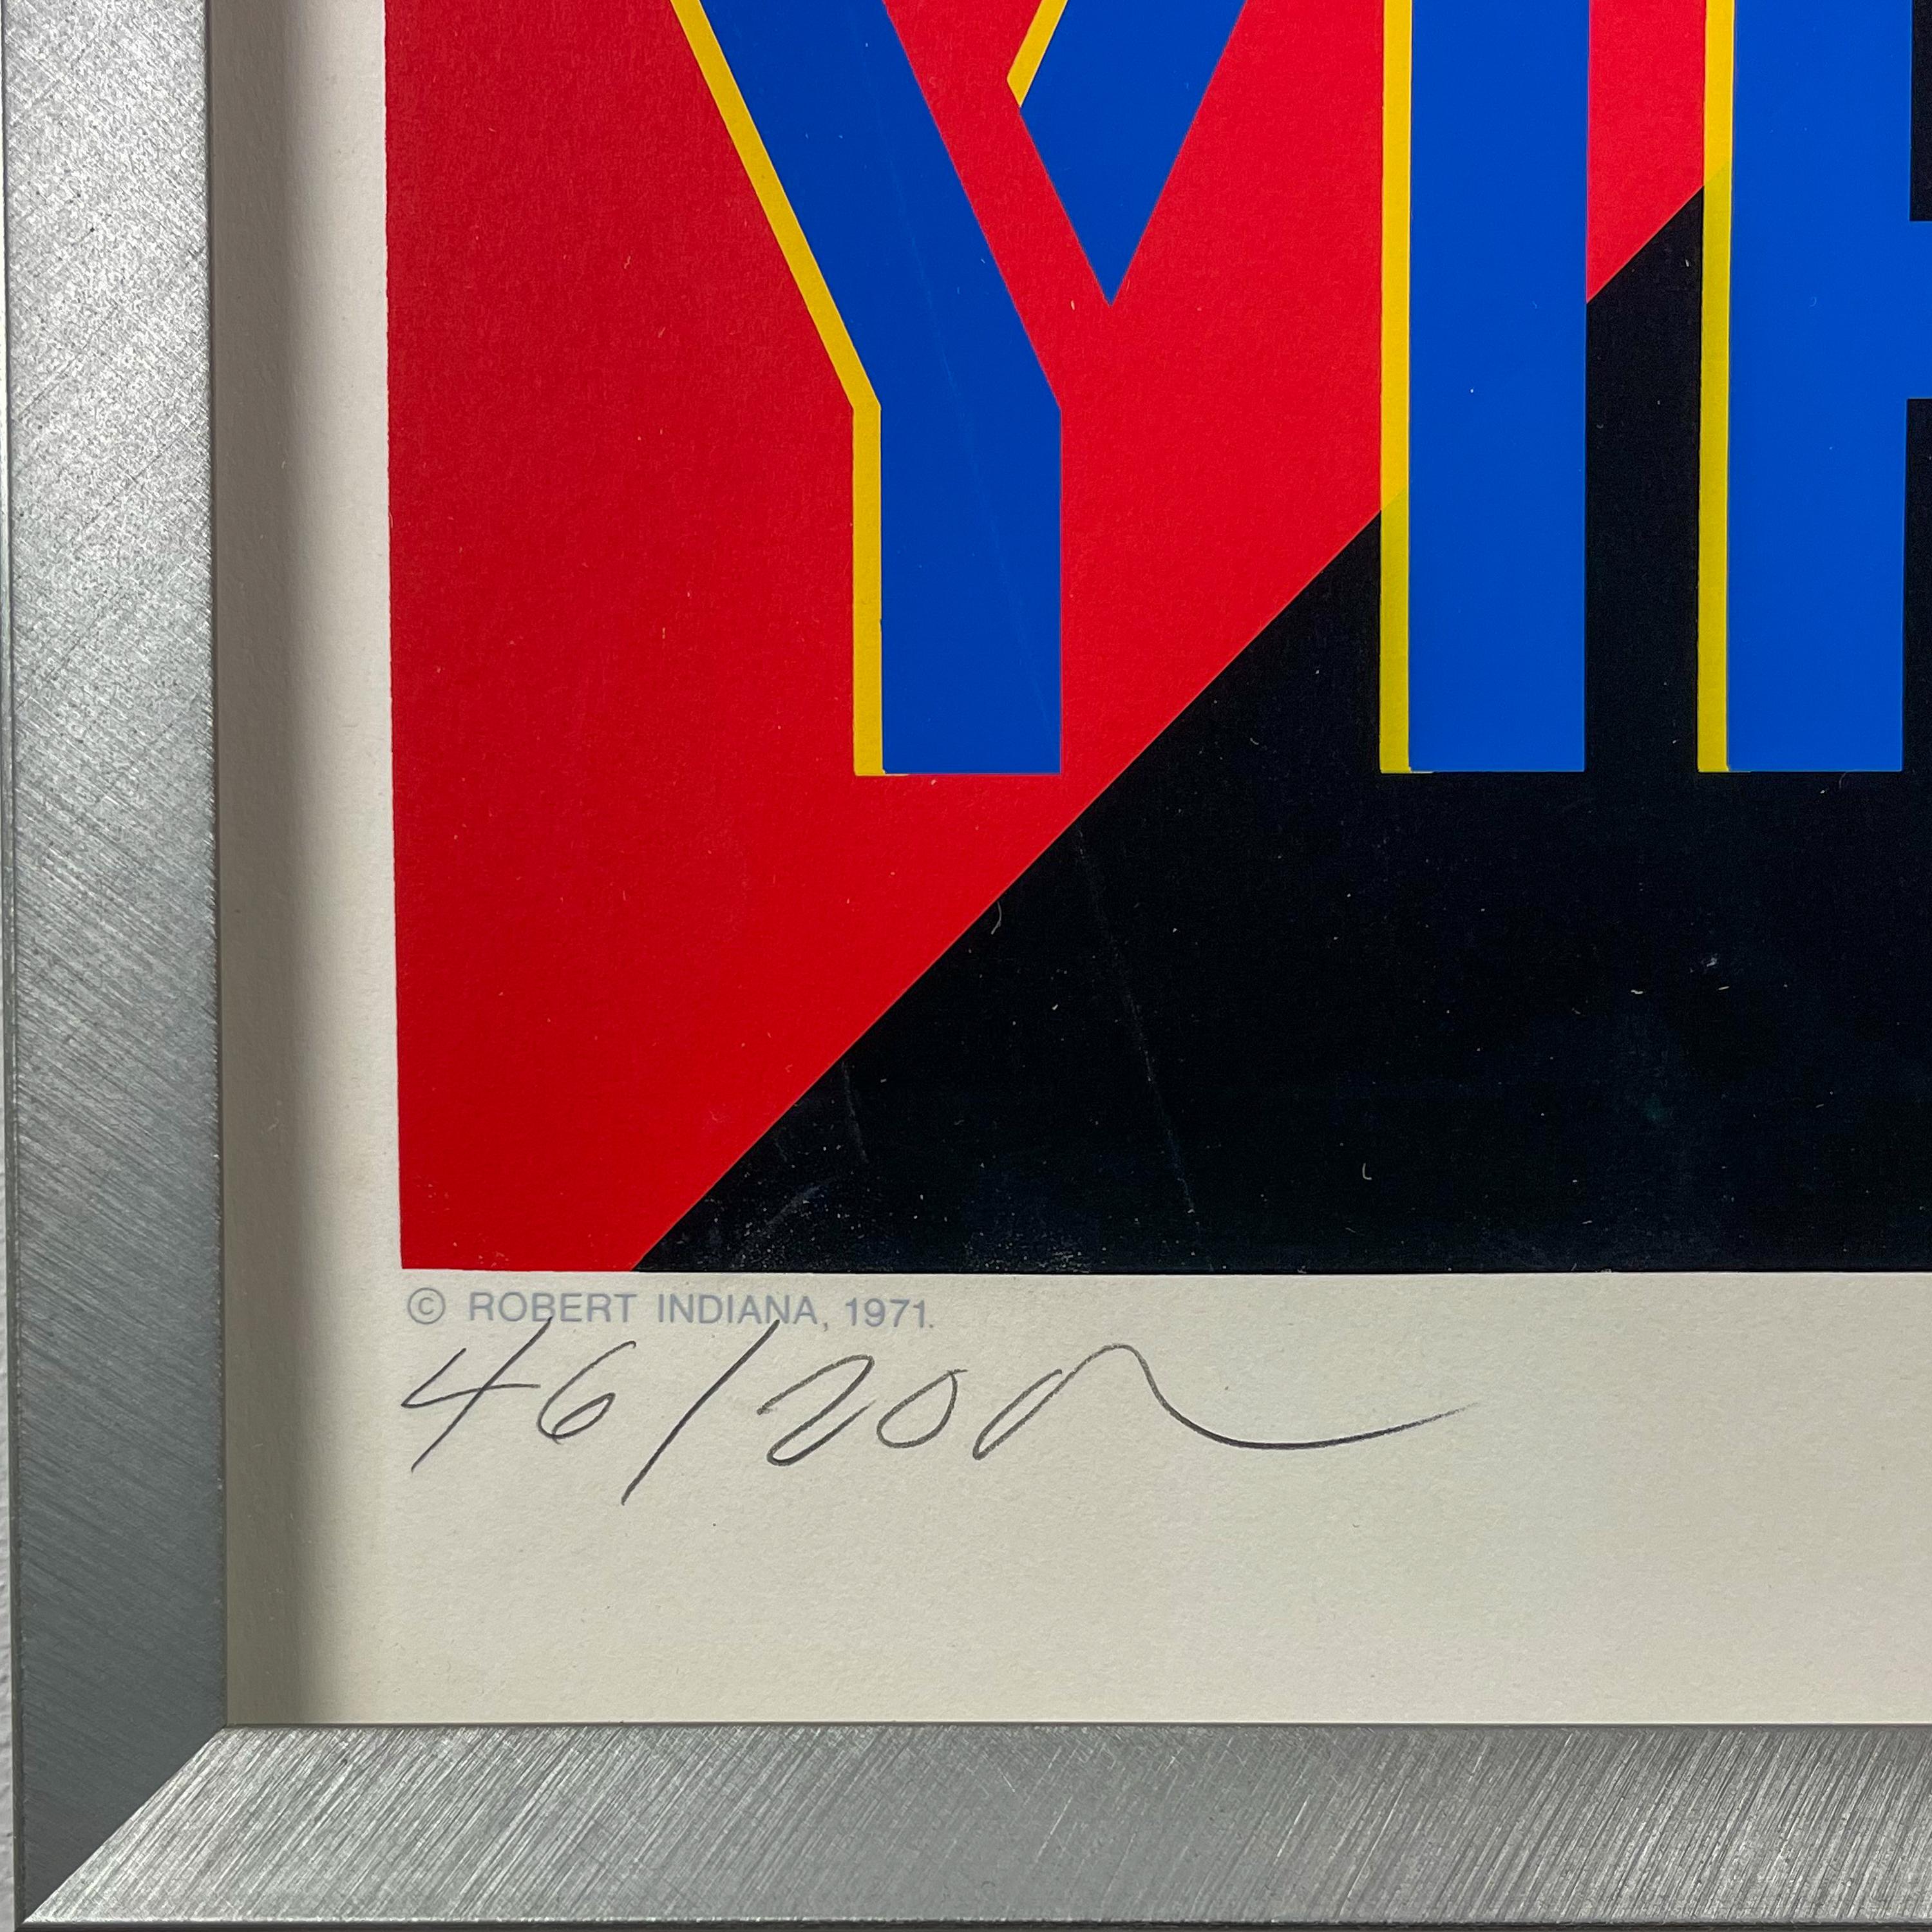 Pop Art Robert Indiana Yield Brother 1971 Screenprint Edition 230 Red Blue

“Yield Brother”, from the “Decade” suite. Screenprint on heavy wove-paper, 1971. An impactful work where Indiana made use of military signage, stenciled letters and a